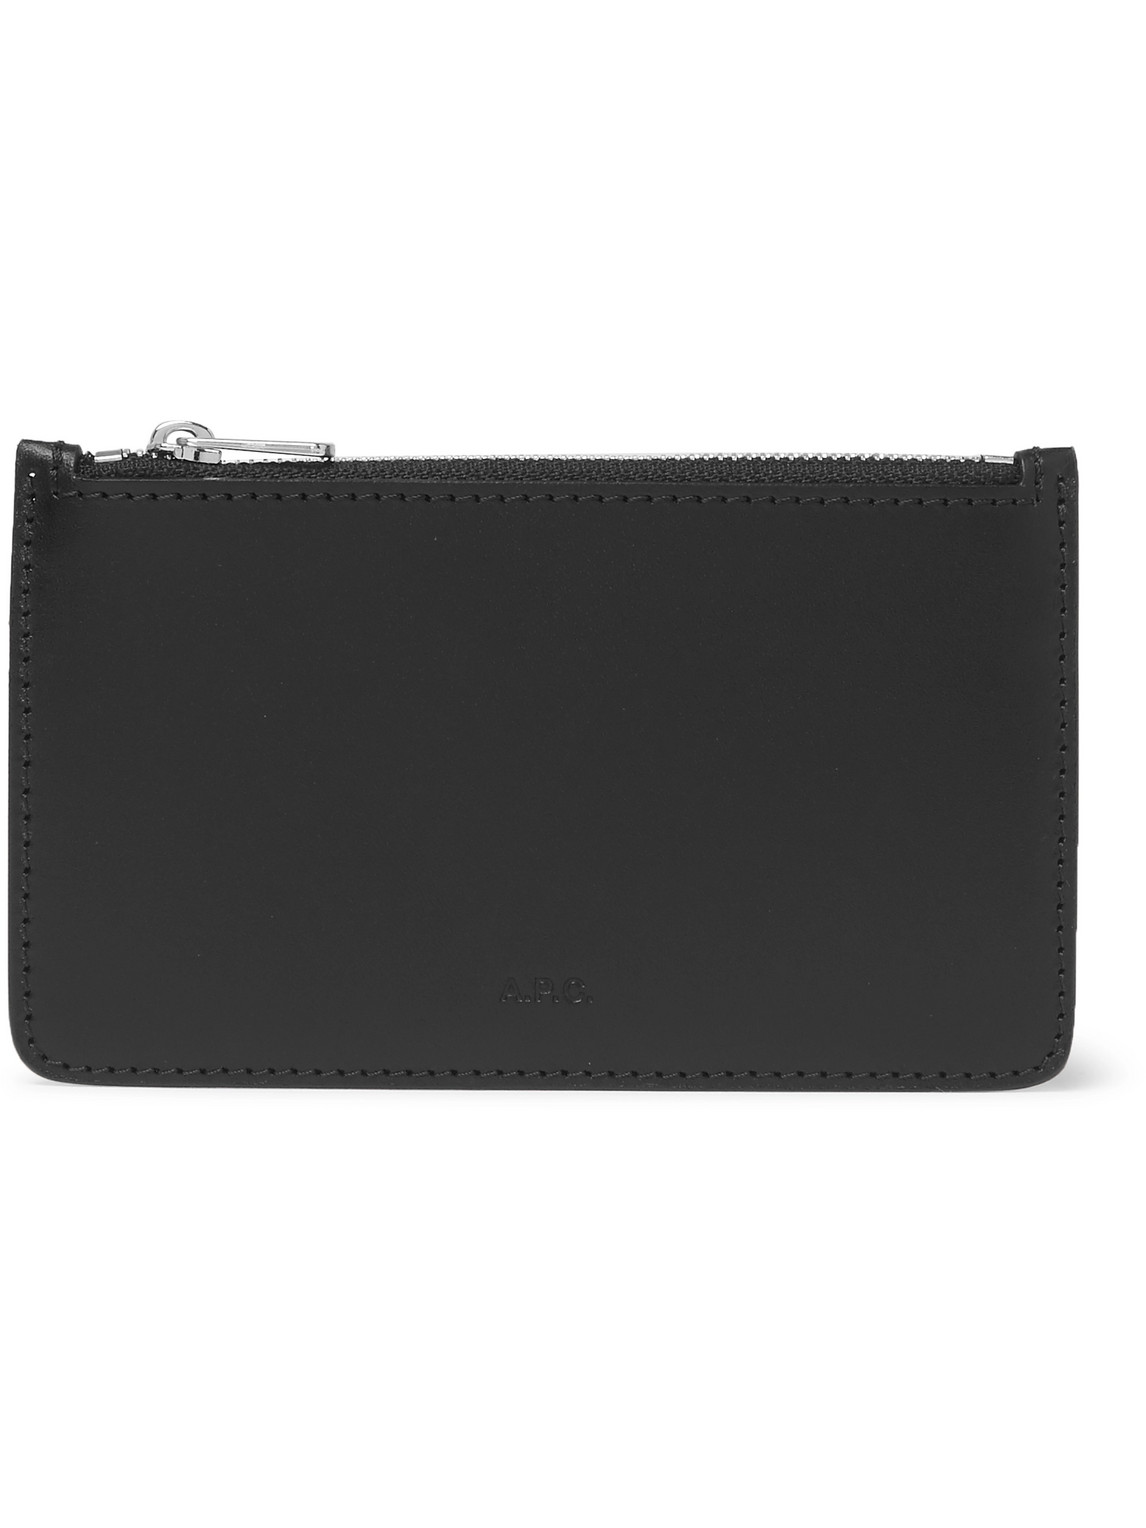 Walter Leather Zipped Cardholder